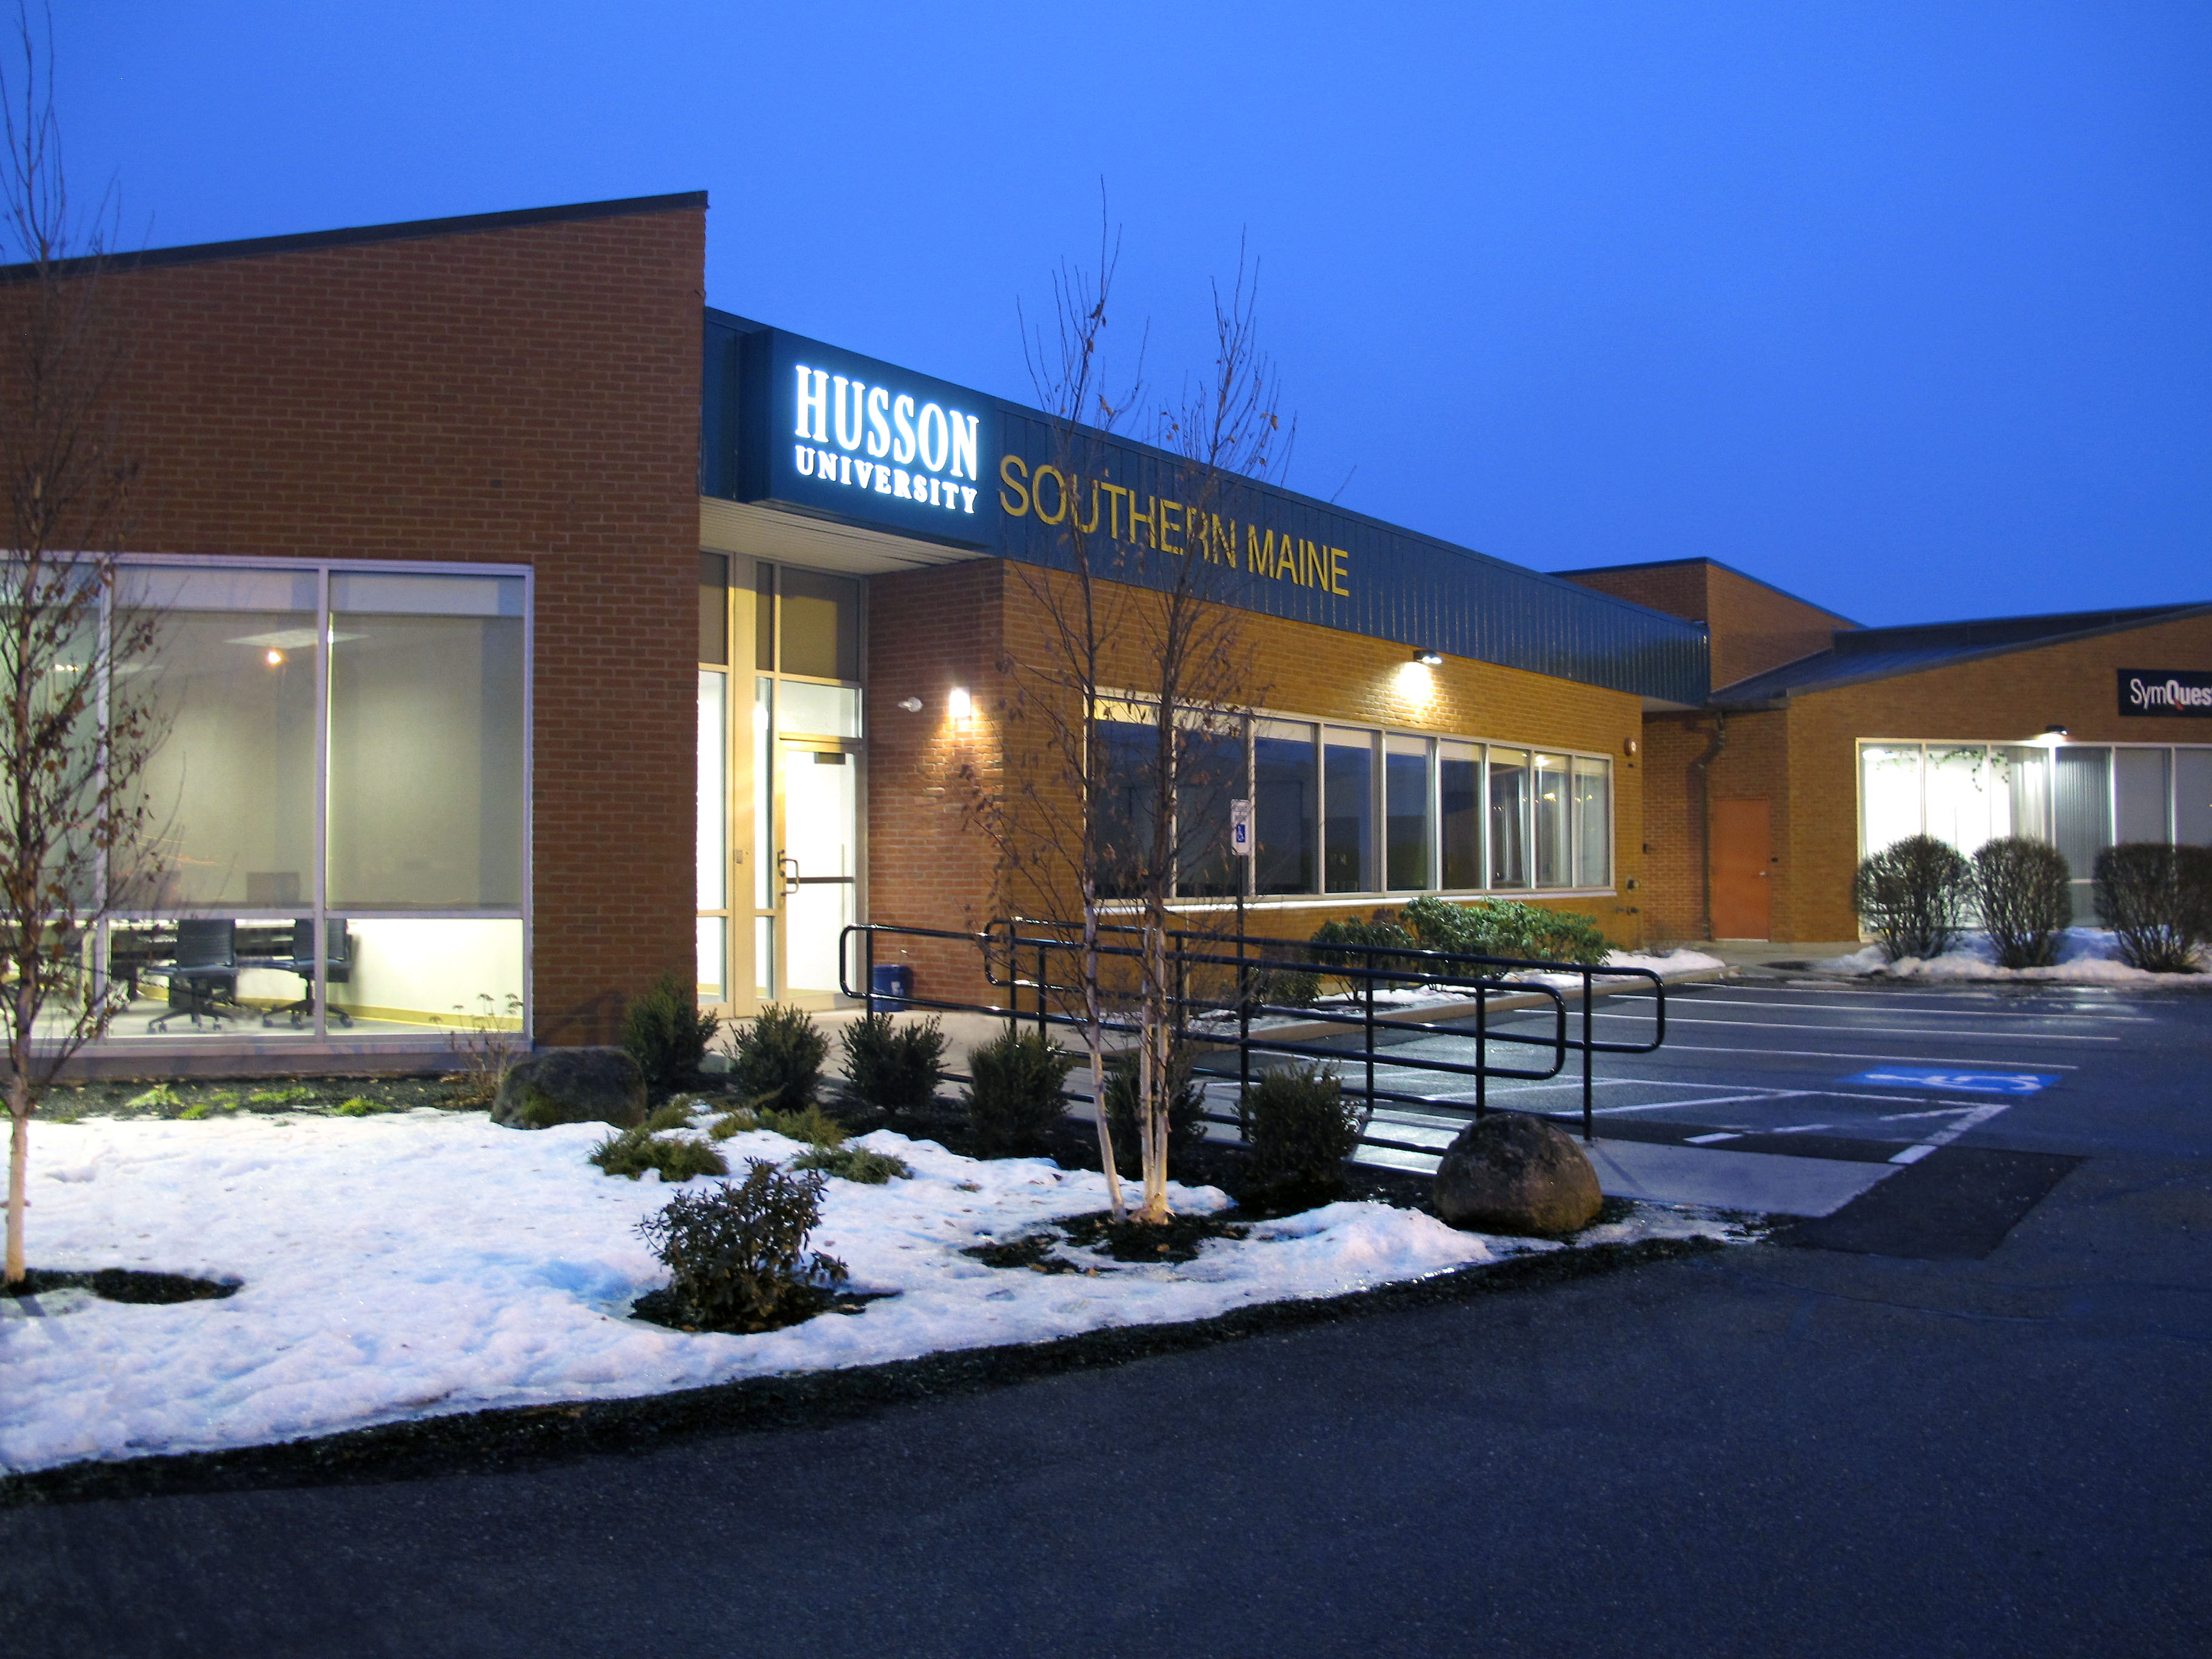 Husson University's Southern Maine campus is located in Westbrook